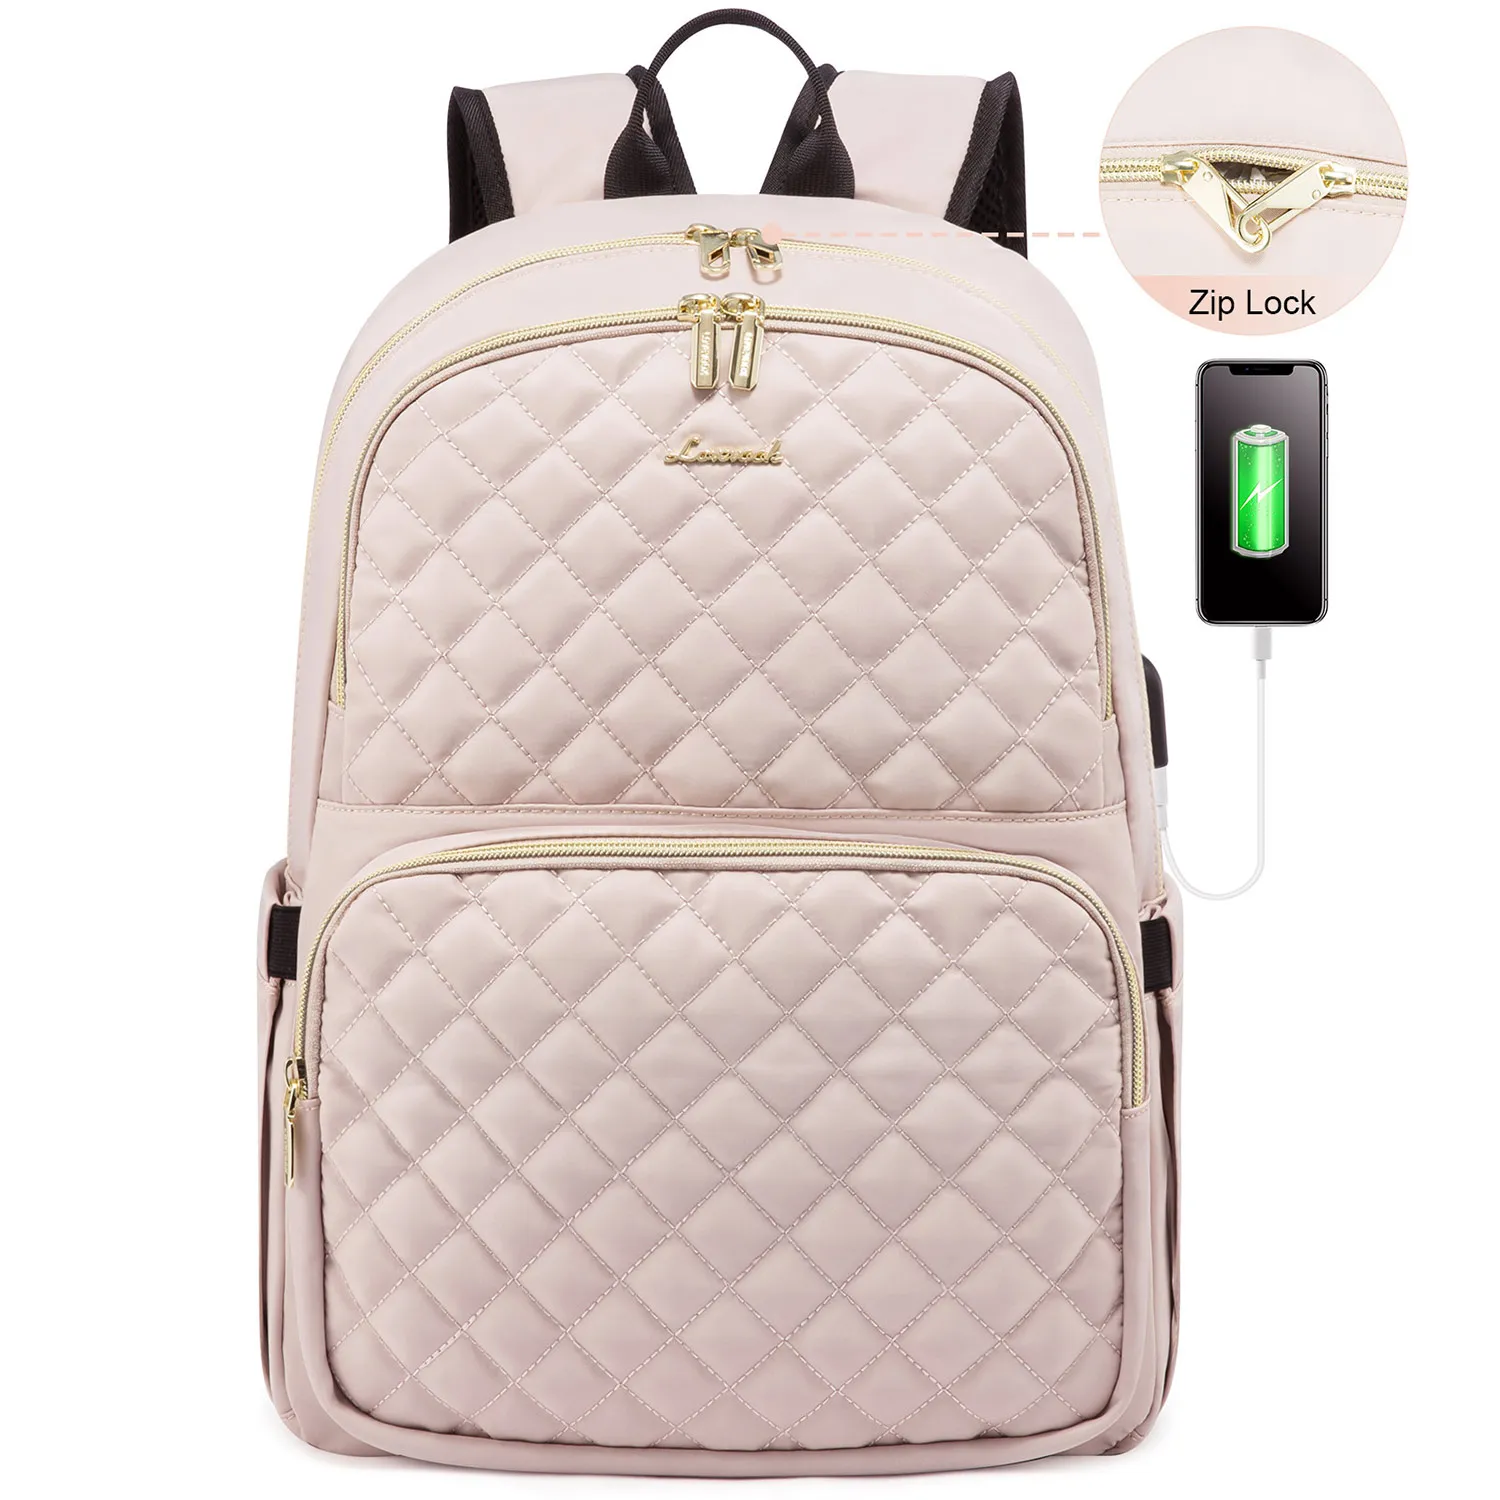 

LOVEVOOK Quilted Nylon Travel Laptop Bag With Anti-Theft Zipper College School Bookbag with USB Port Men Women Laptop Backpacks